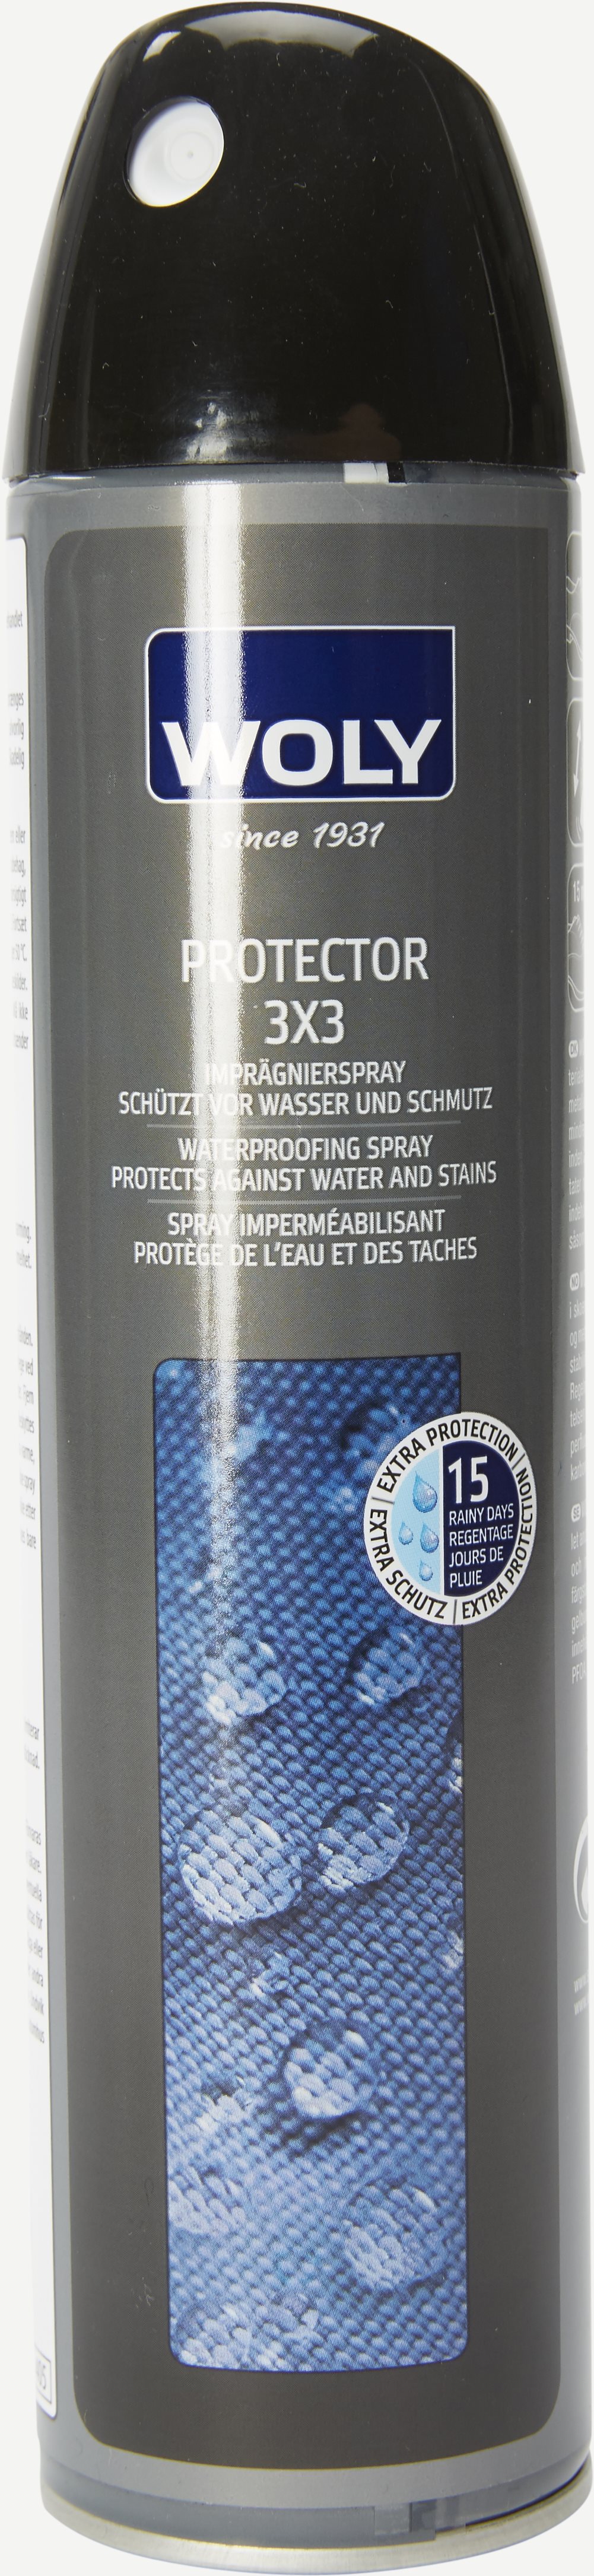 Woly Protector Accessories WOLY PROTECTOR 3X3 Grå